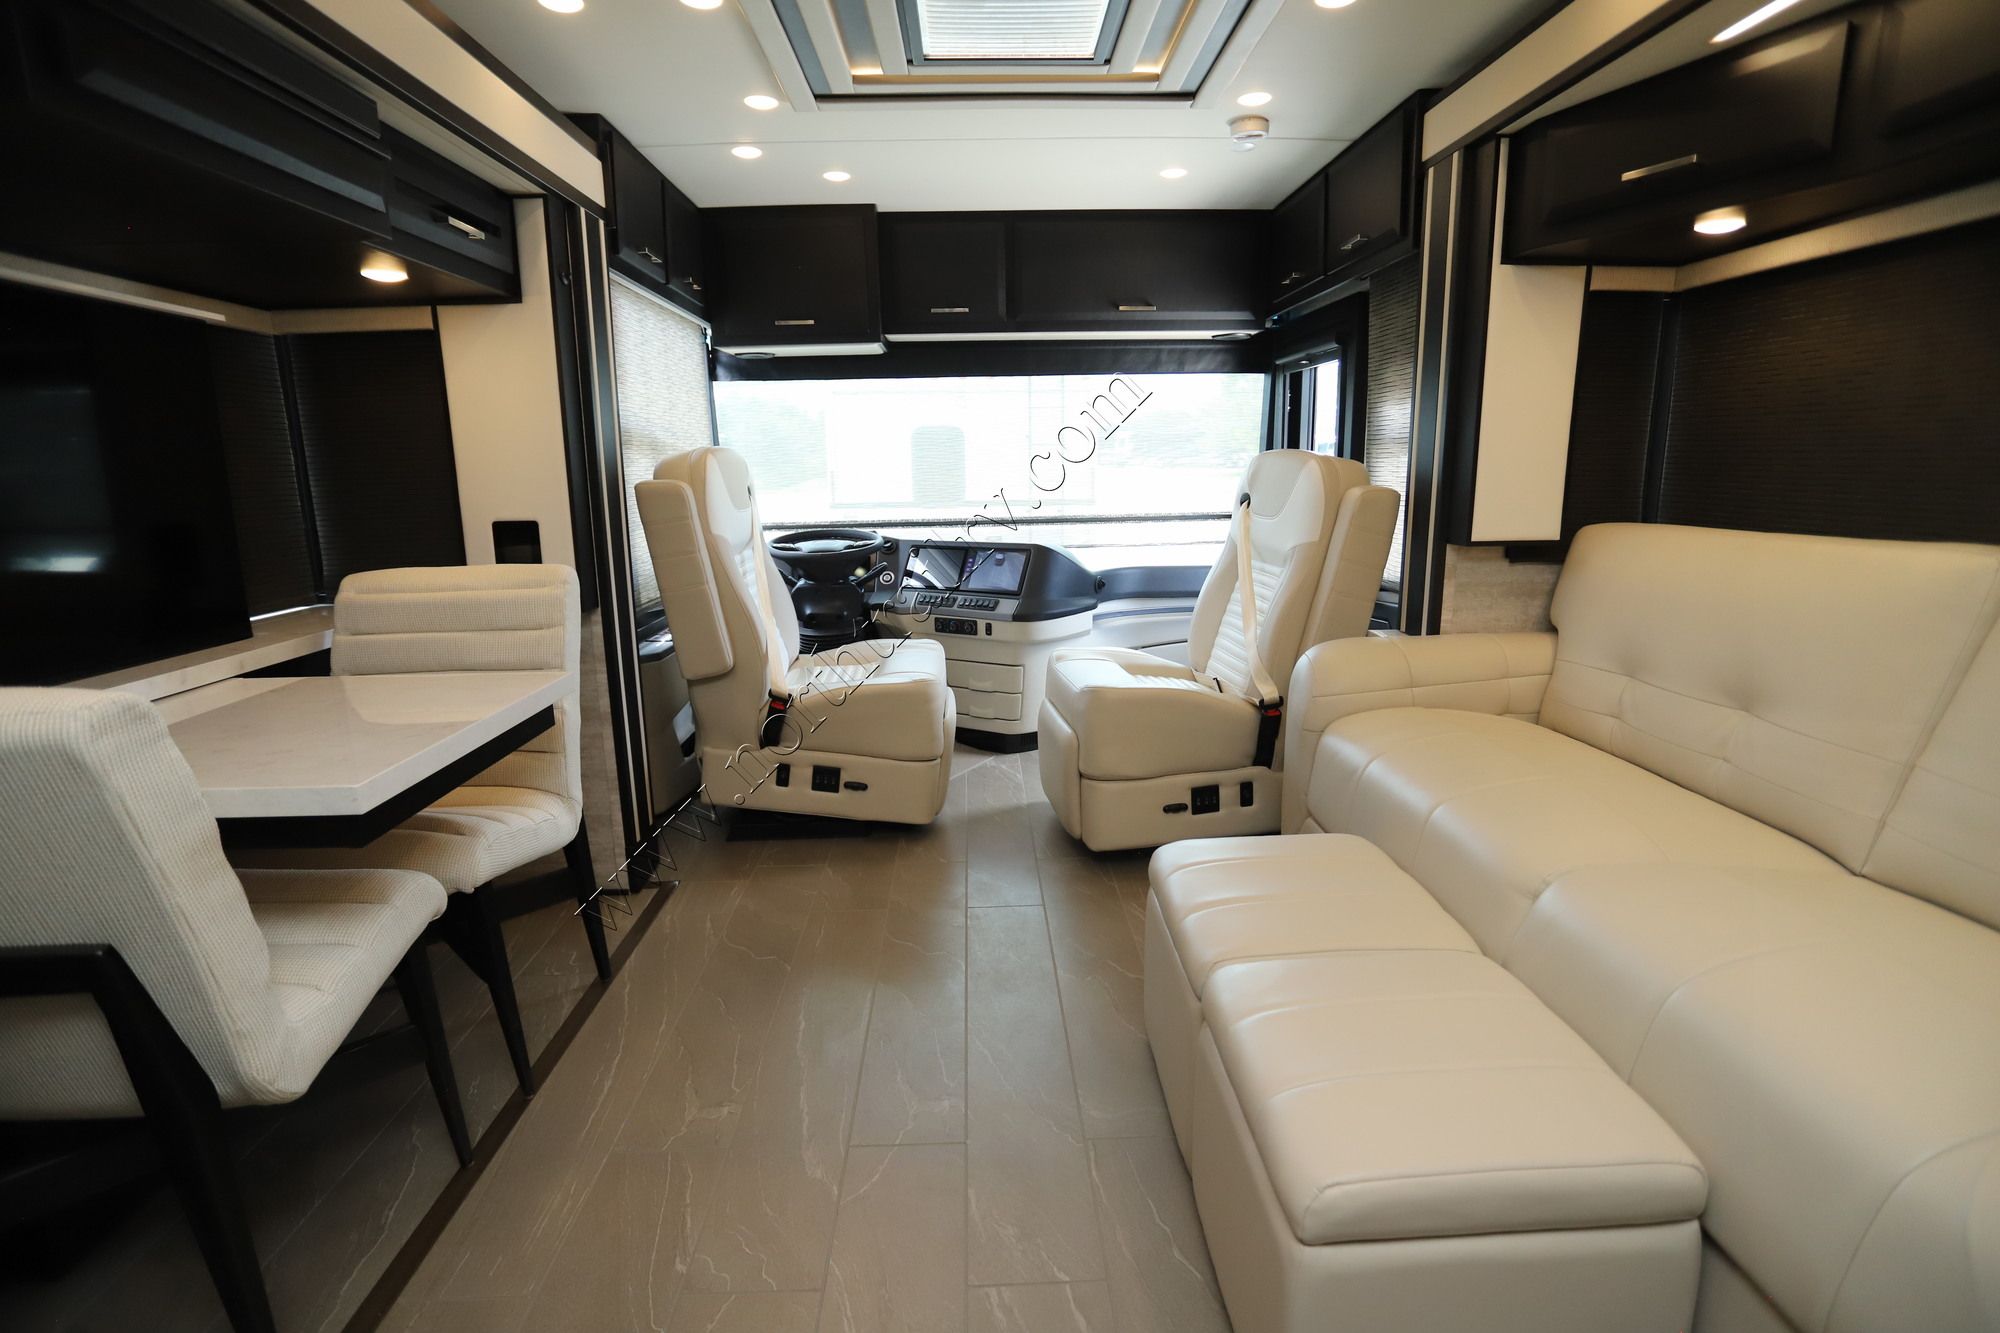 New 2022 Newmar New Aire 3545 Class A  For Sale